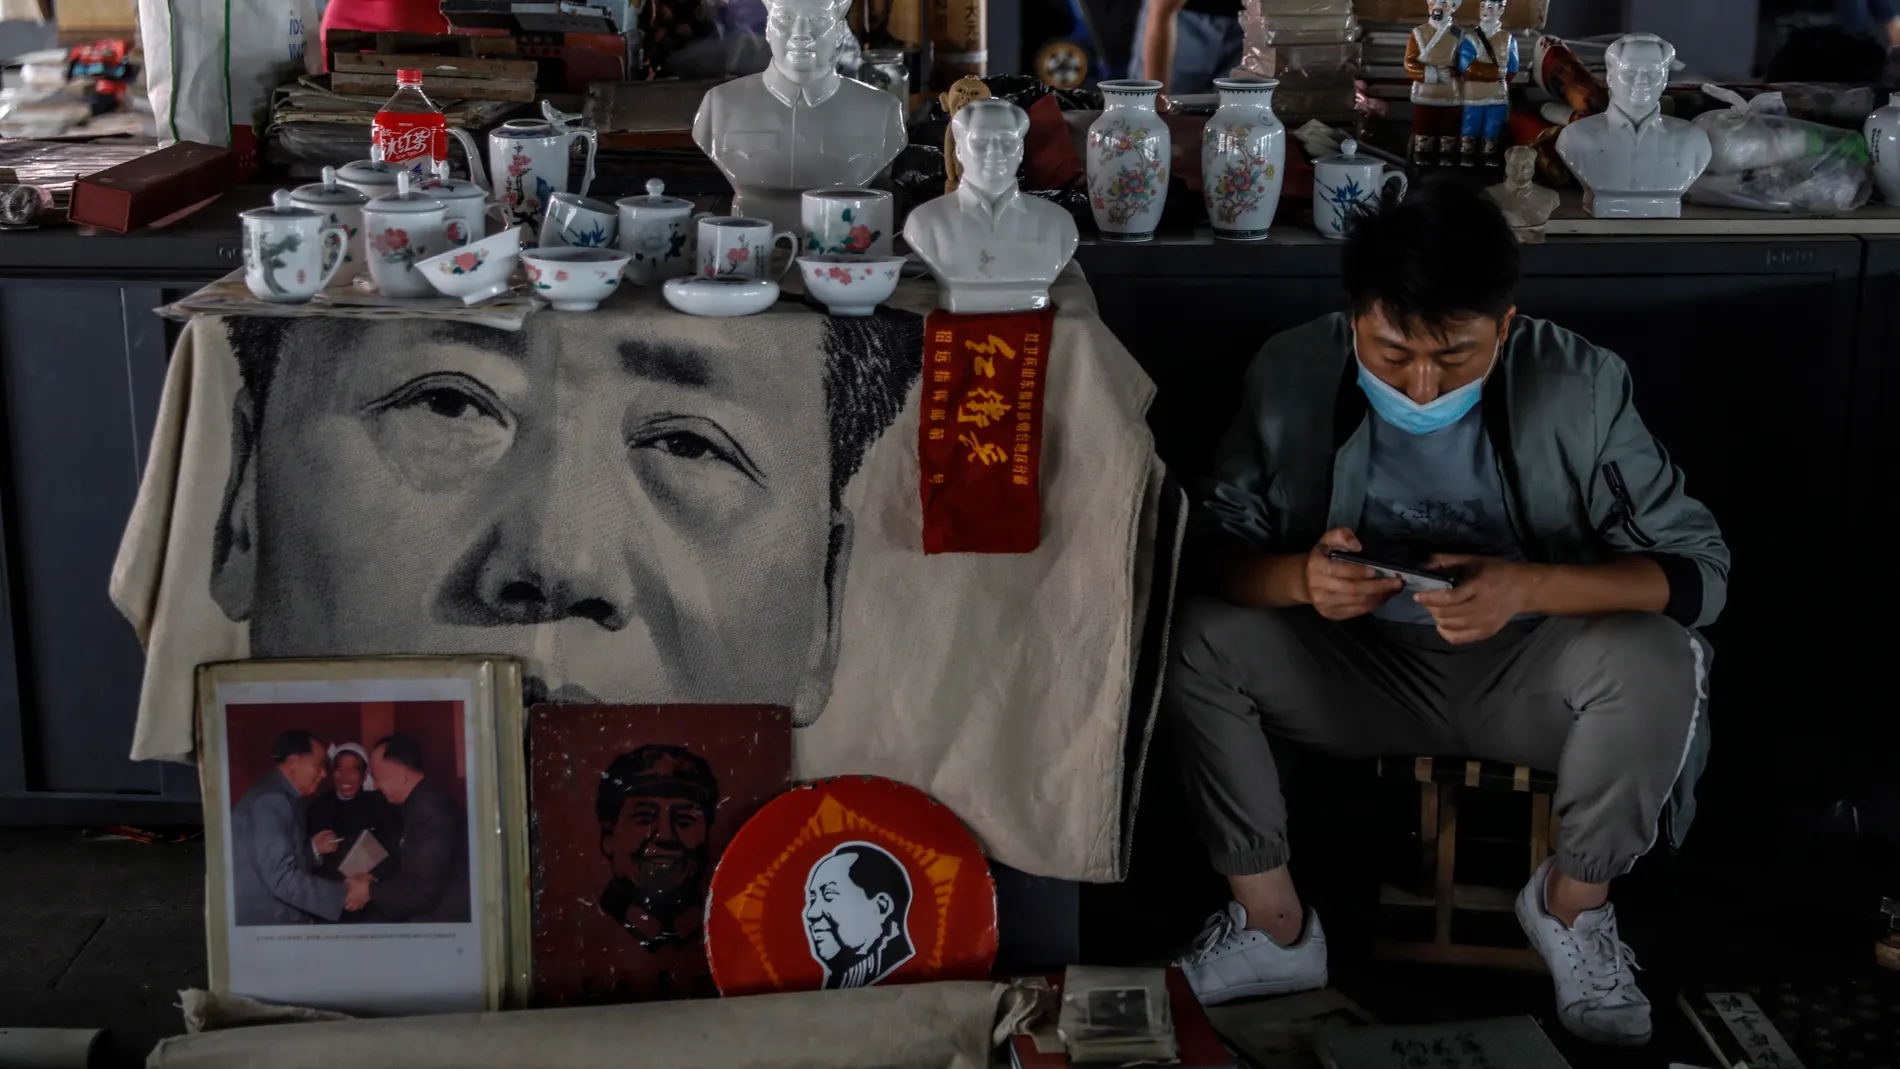 Former Chinese leader Mao Zedong's portraits at Panjiayuan Antique market